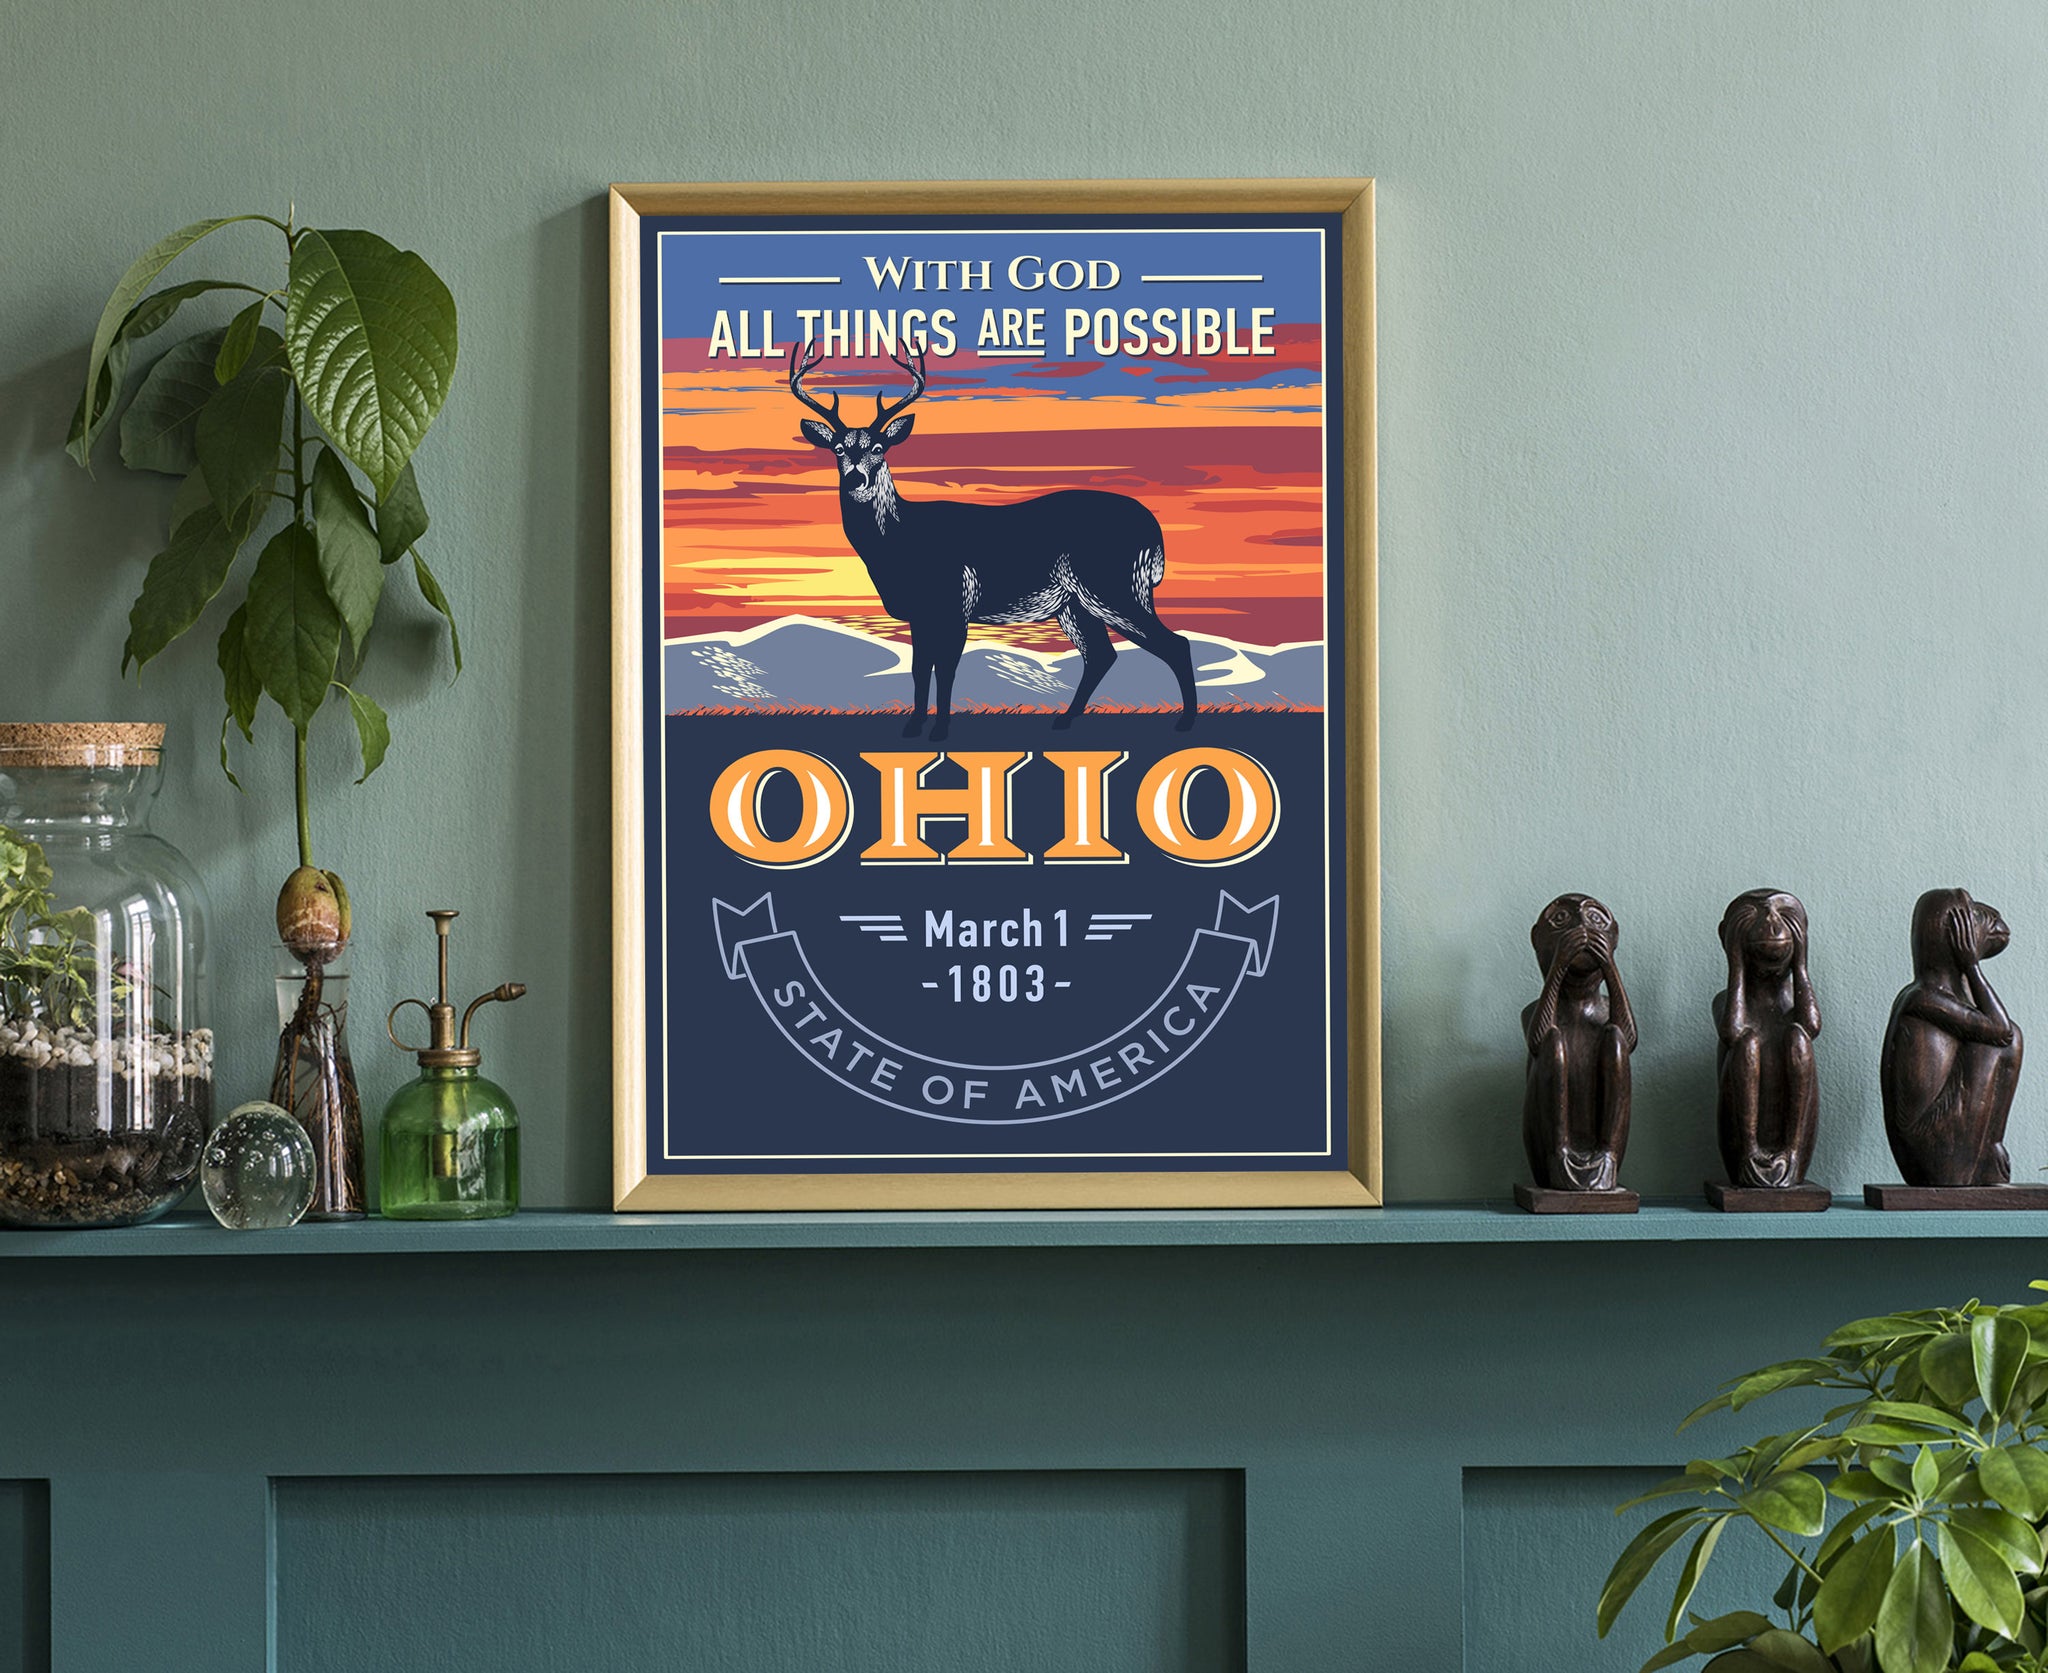 United States Poster, Ohio State Poster Print, Ohio State Emblem Poster, Retro Travel State Poster, Home Wall Art, Office Wall Art